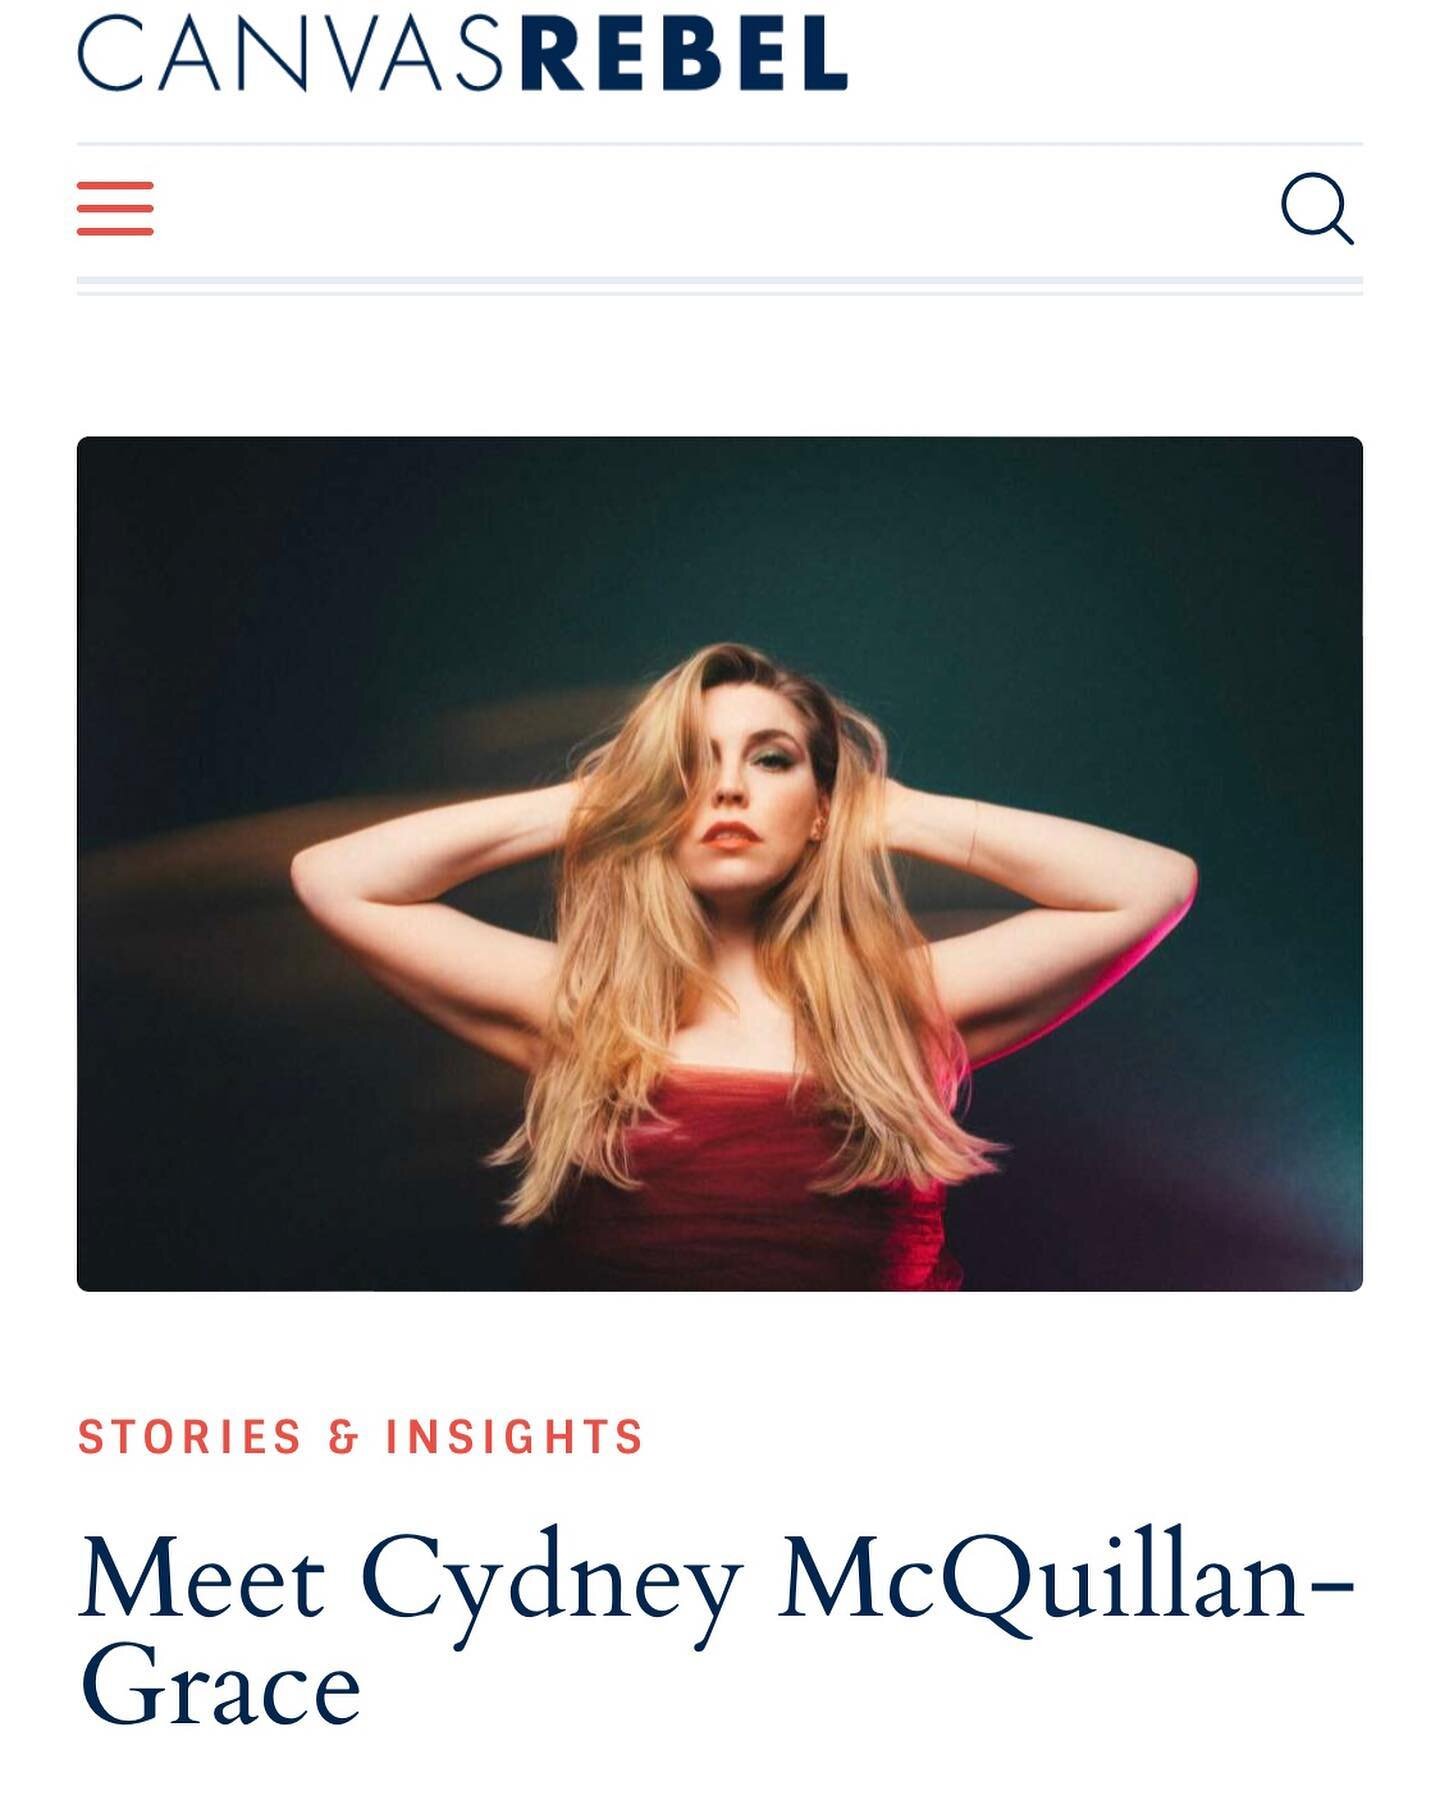 Thanks so much to @canvasrebel for this feature, and for giving artists the platform to showcase their projects!  You can read the full interview by clicking the link in my bio :)
.
.
.
.
#canvasrebel #interview #cydney #singer #singersongwriter #ori